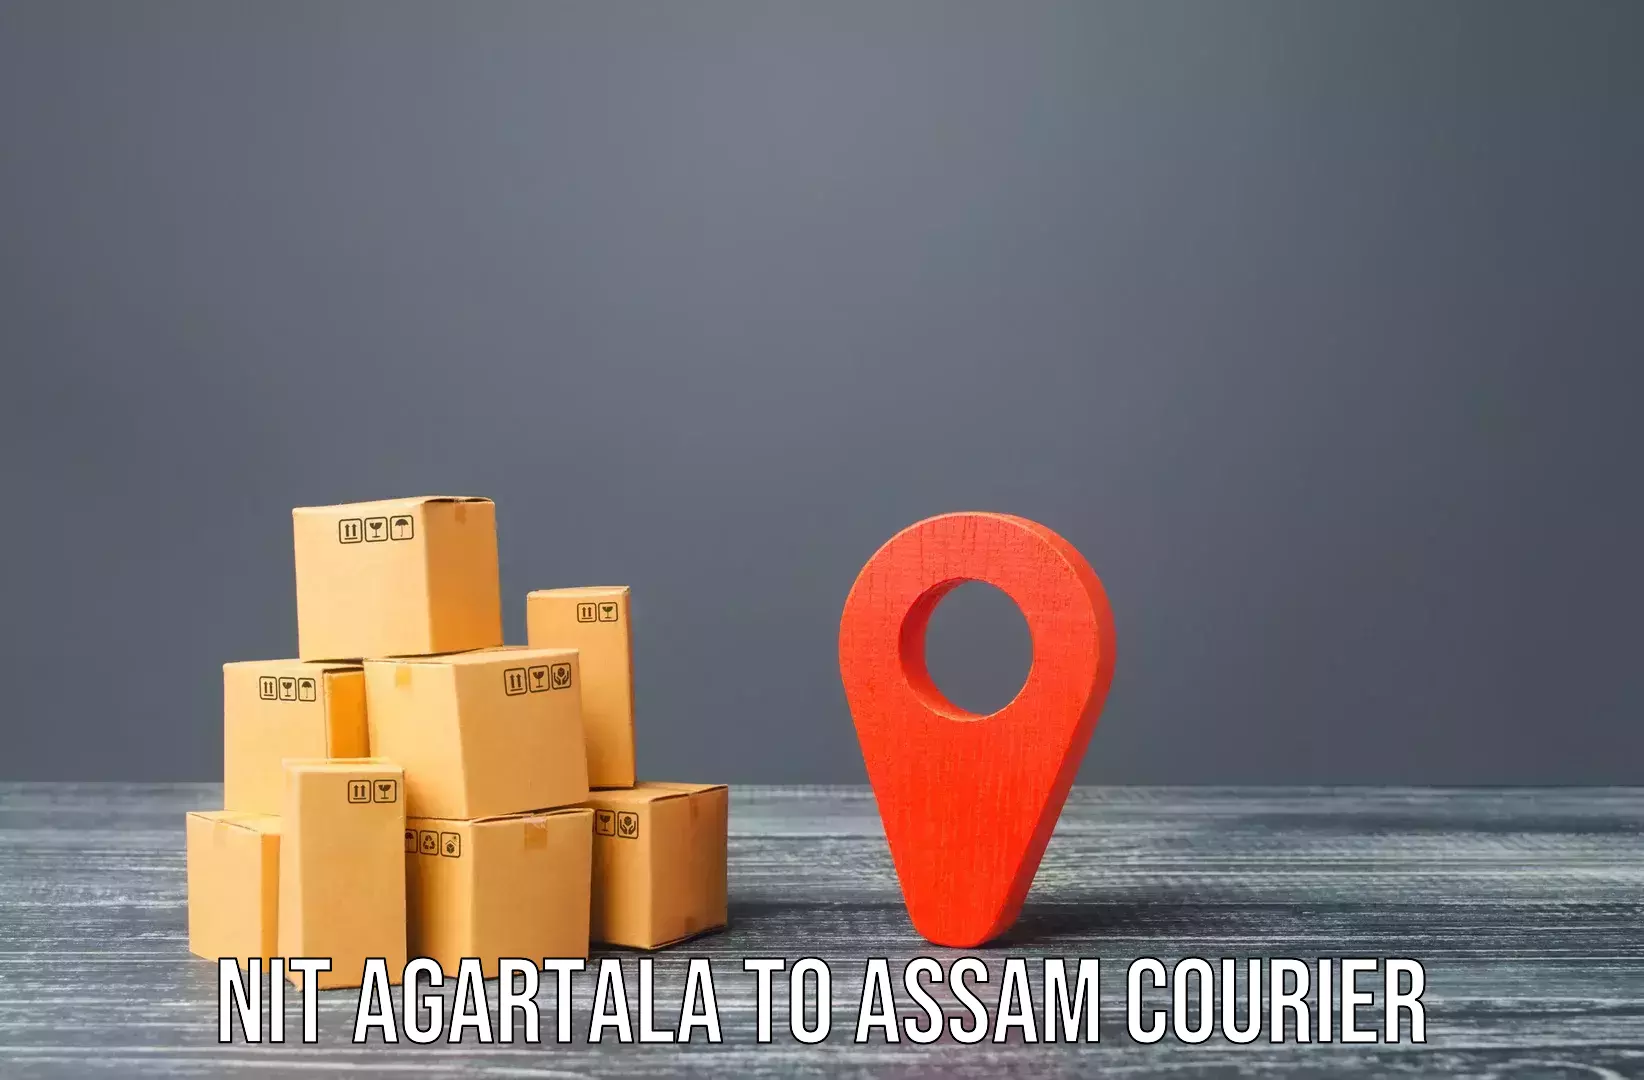 Quality moving and storage NIT Agartala to Silchar